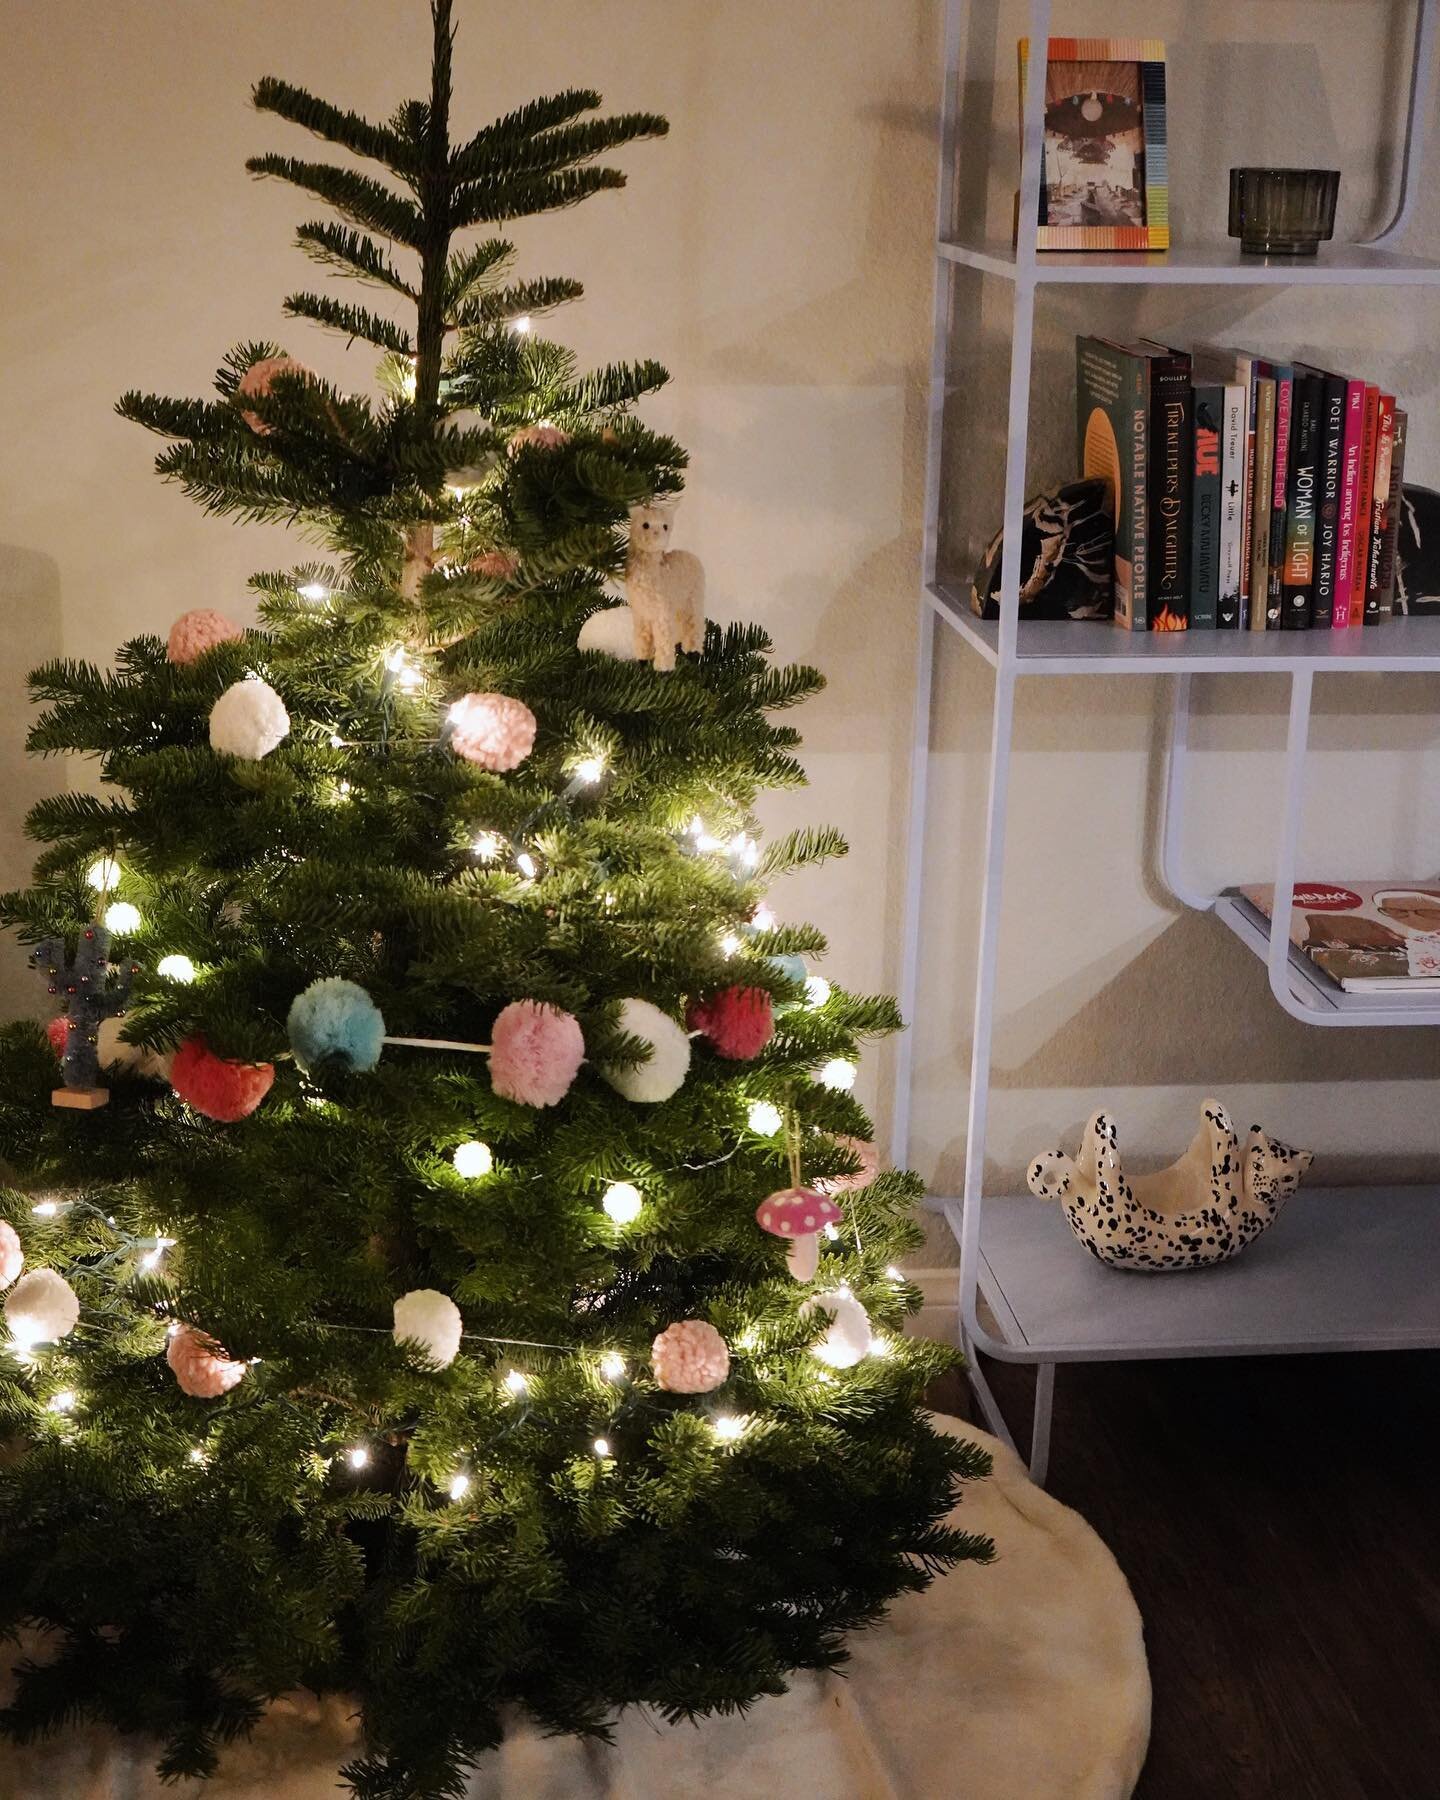 🎄📚 my tree &amp; my books 🤩🤍 

my main decor description is: COLOR! specifically pastel colors. most of my apartment is full of purple, pink, blue, &amp; any other pretty colors i love 😍

i havent decorated a tree since 2019, i opted for a REAL 